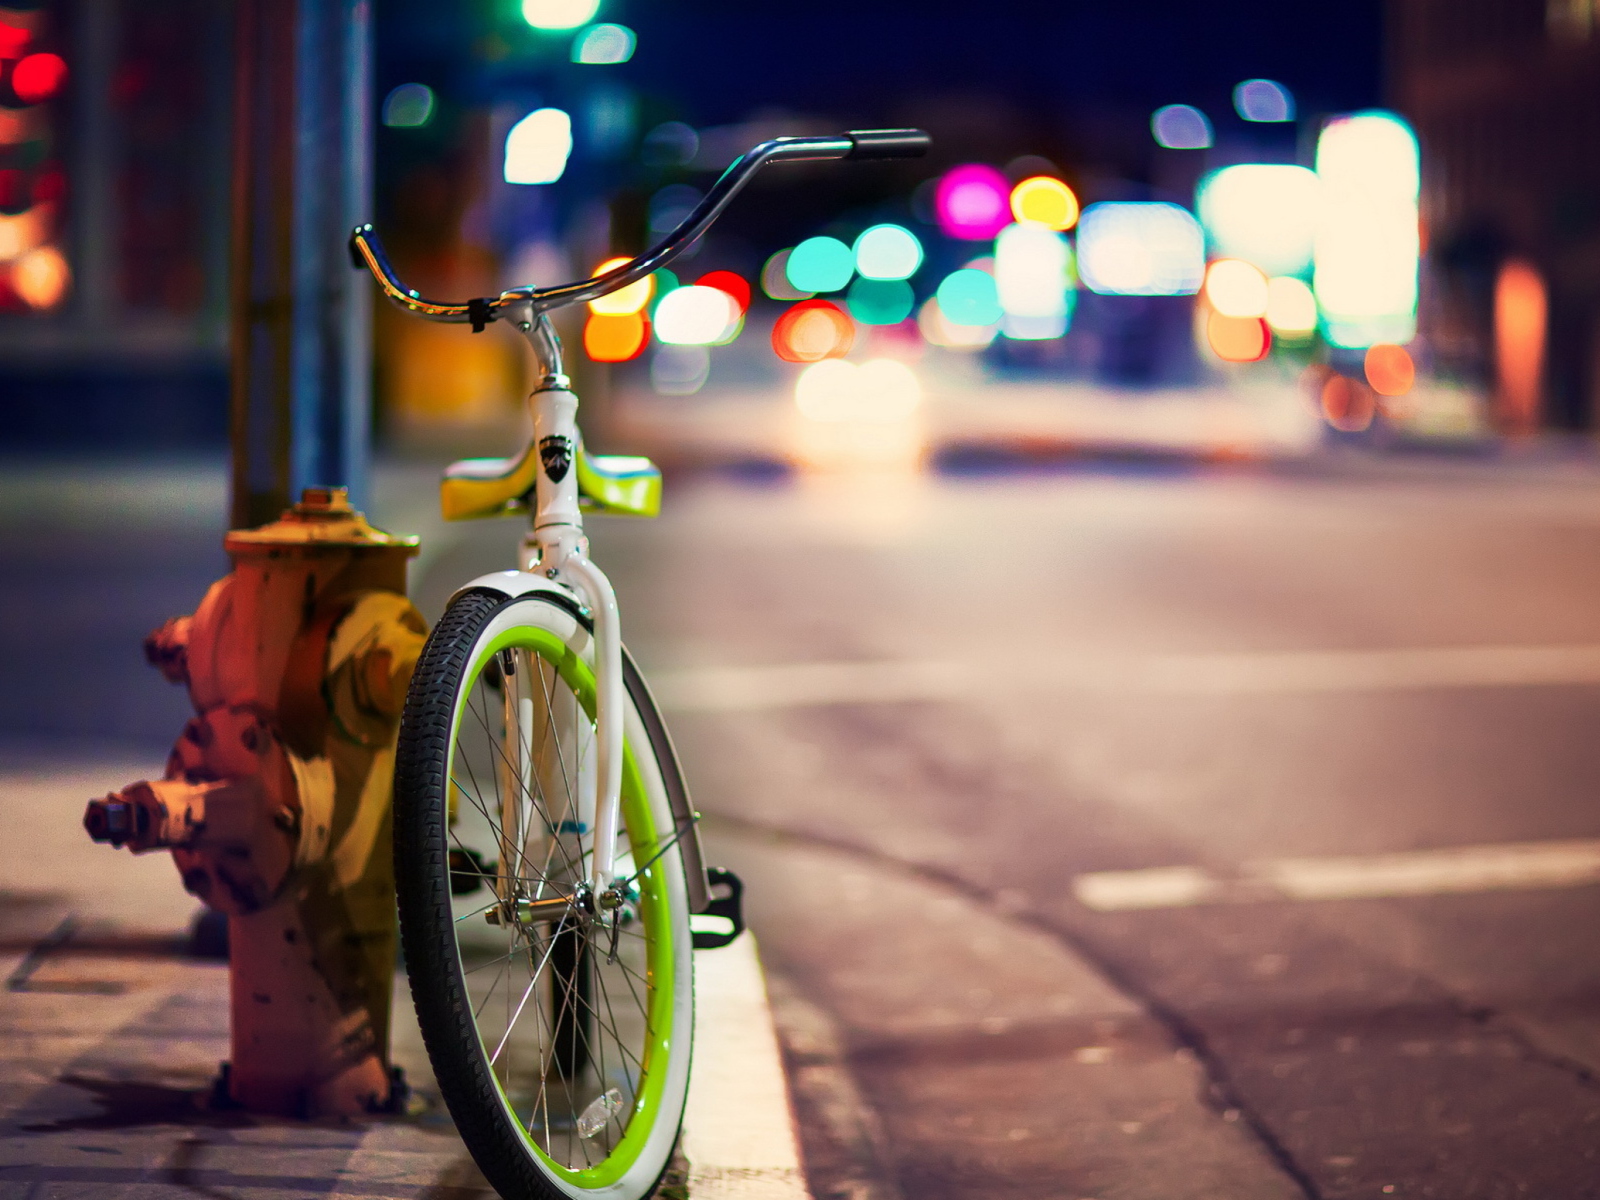 Green Bicycle In City Lights wallpaper 1600x1200